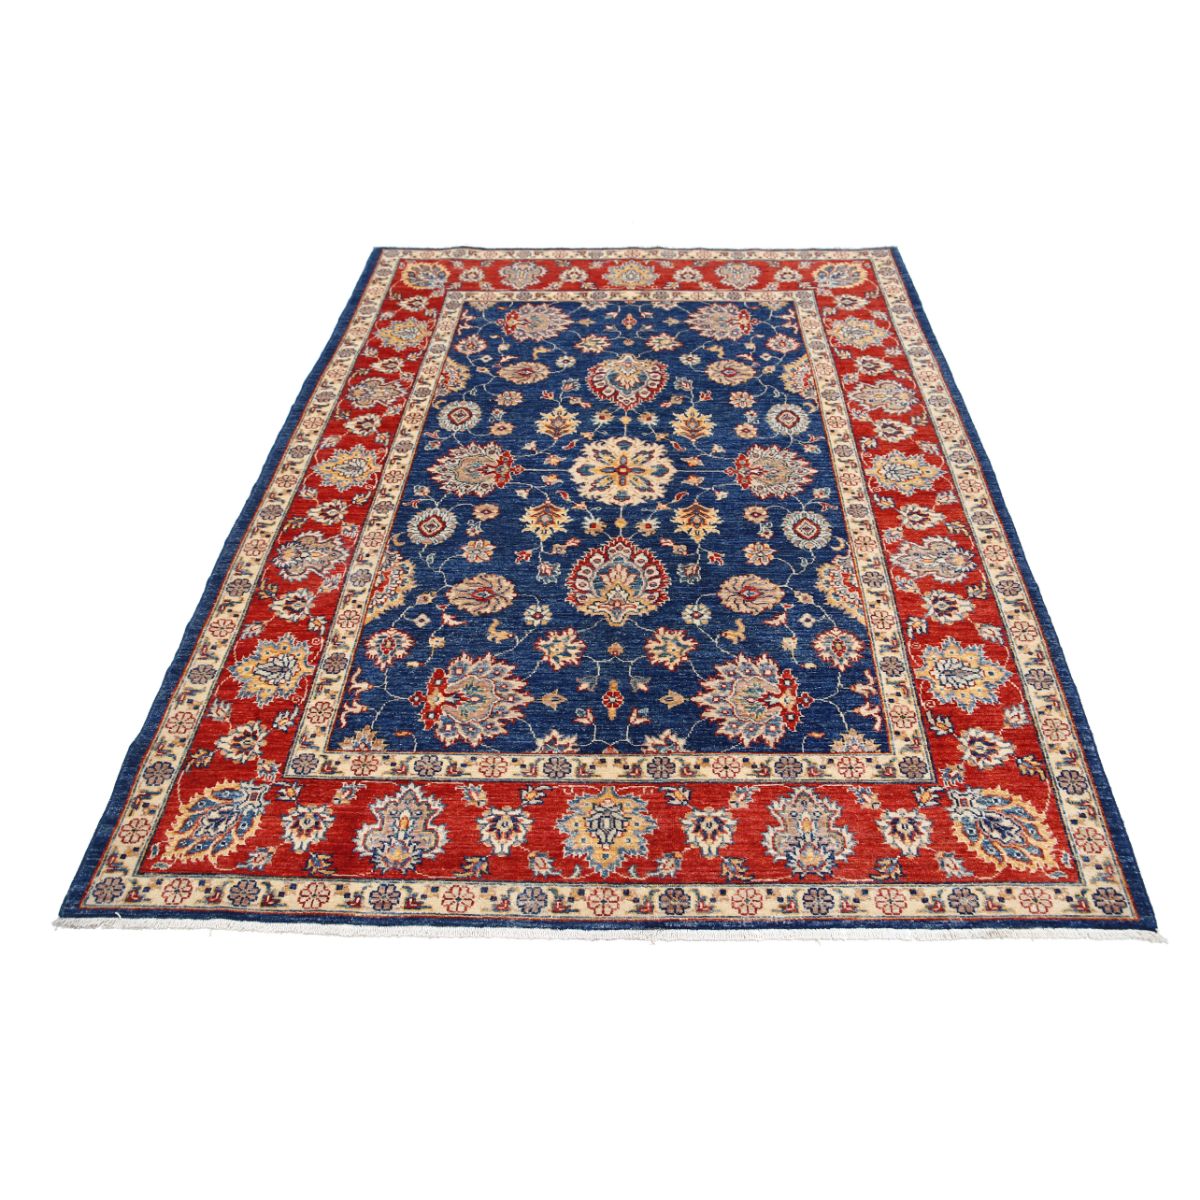 Ziegler 5'1" X 6'9" Wool Hand-Knotted Rug